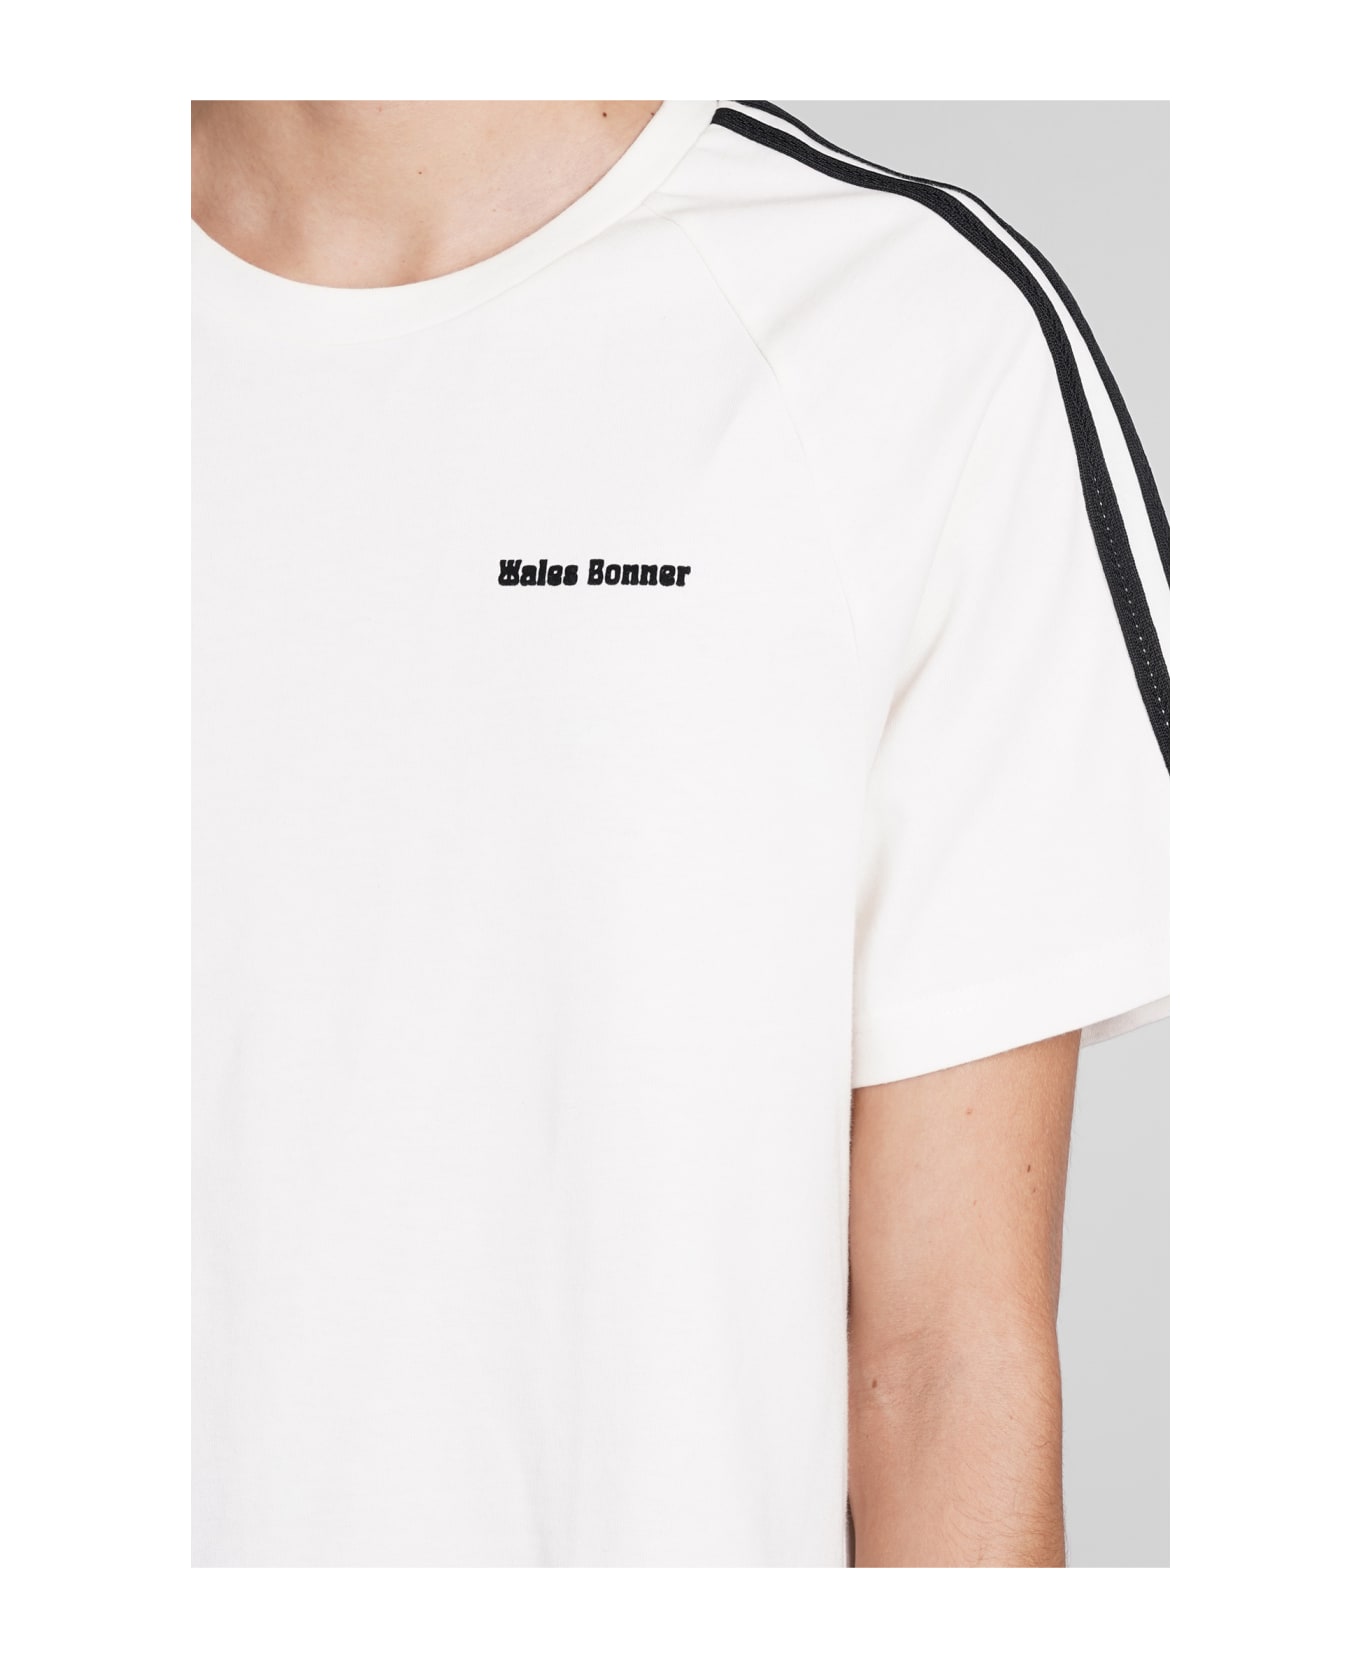 Adidas Originals by Wales Bonner T-shirt In White Cotton - white